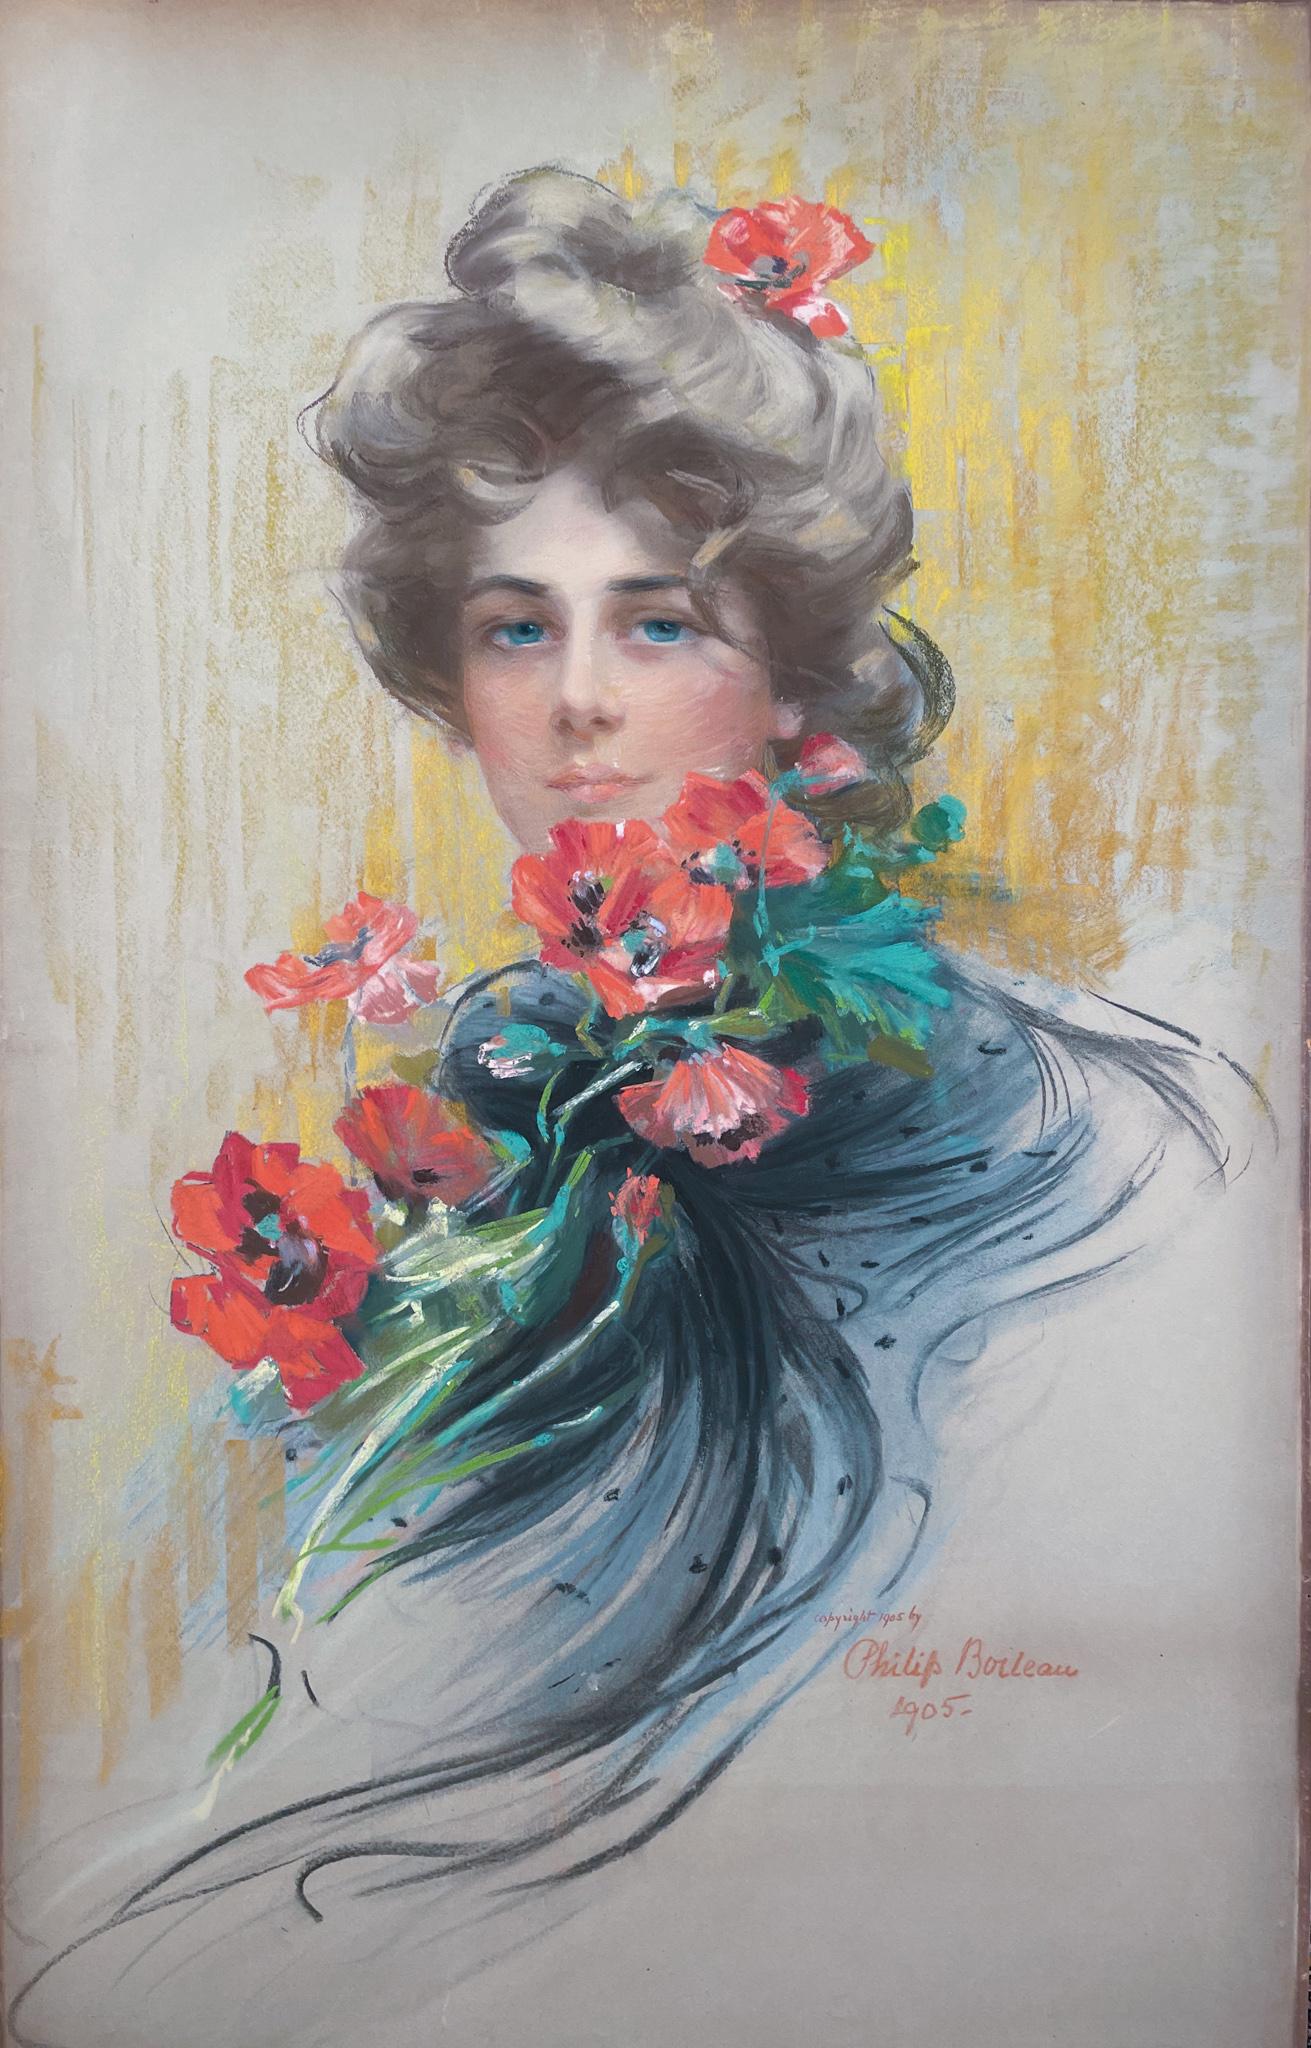 Philip Boileau Portrait - Woman With Red Poppies